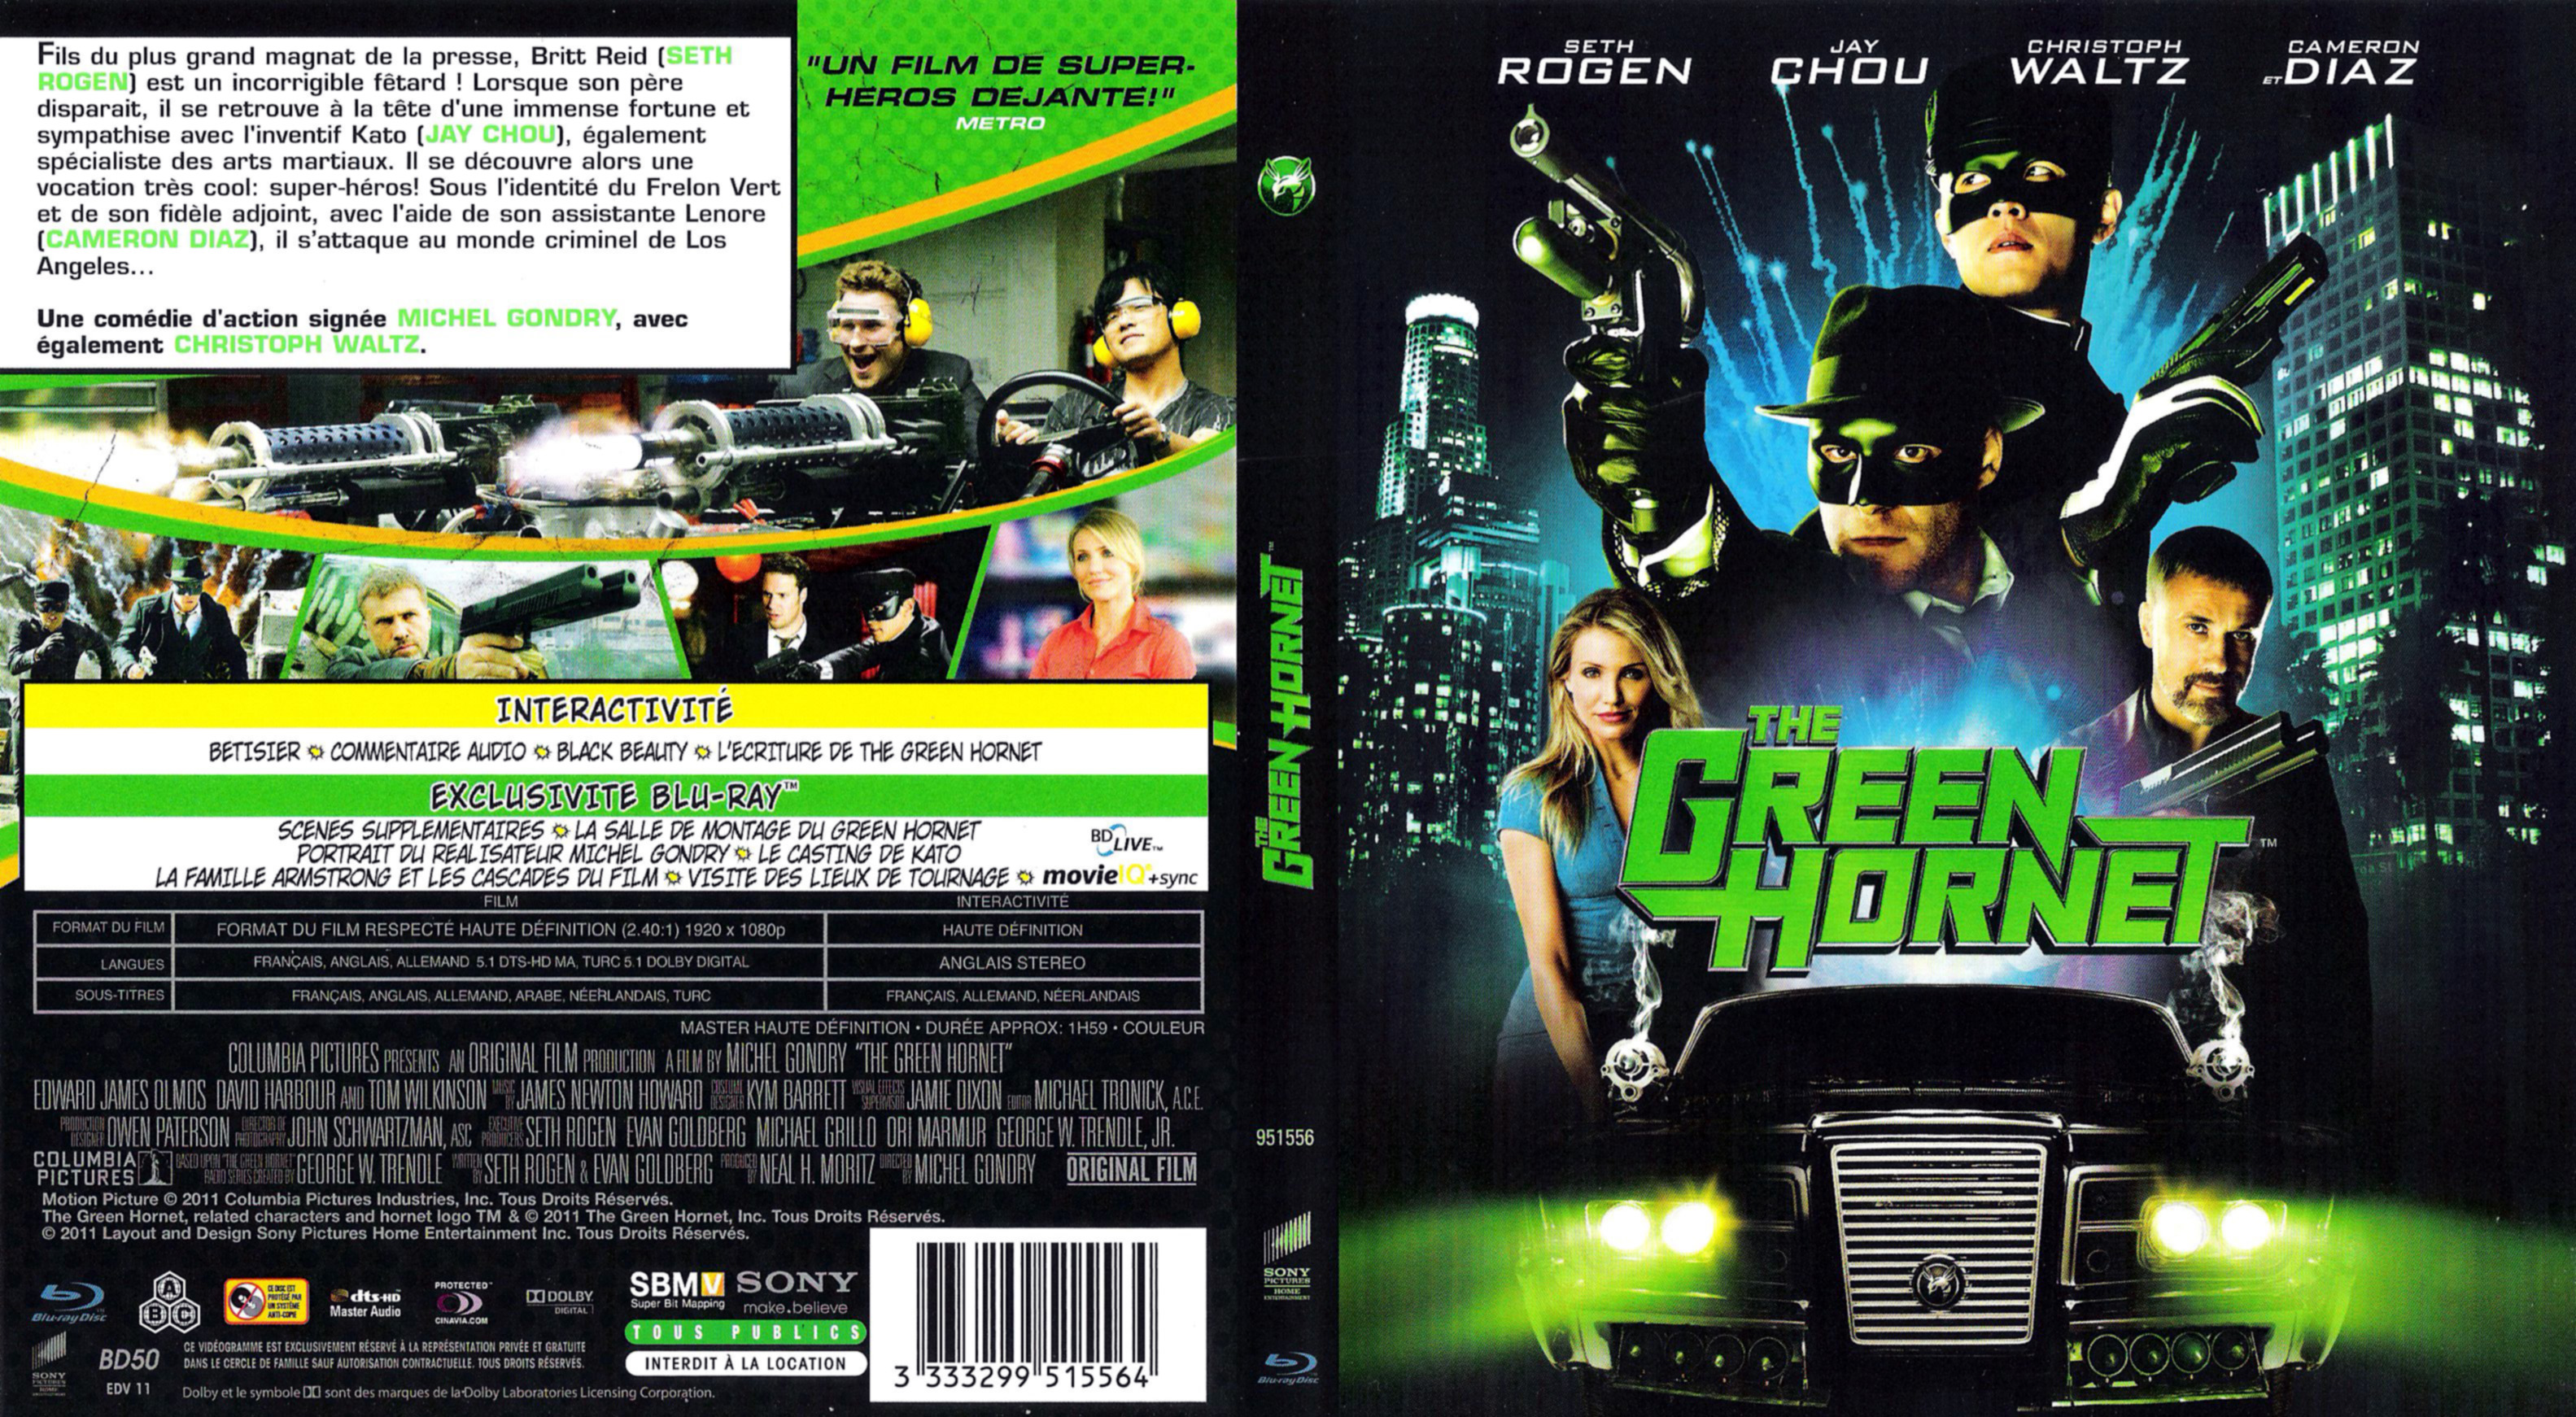 Jaquette DVD The green hornet (BLU-RAY)